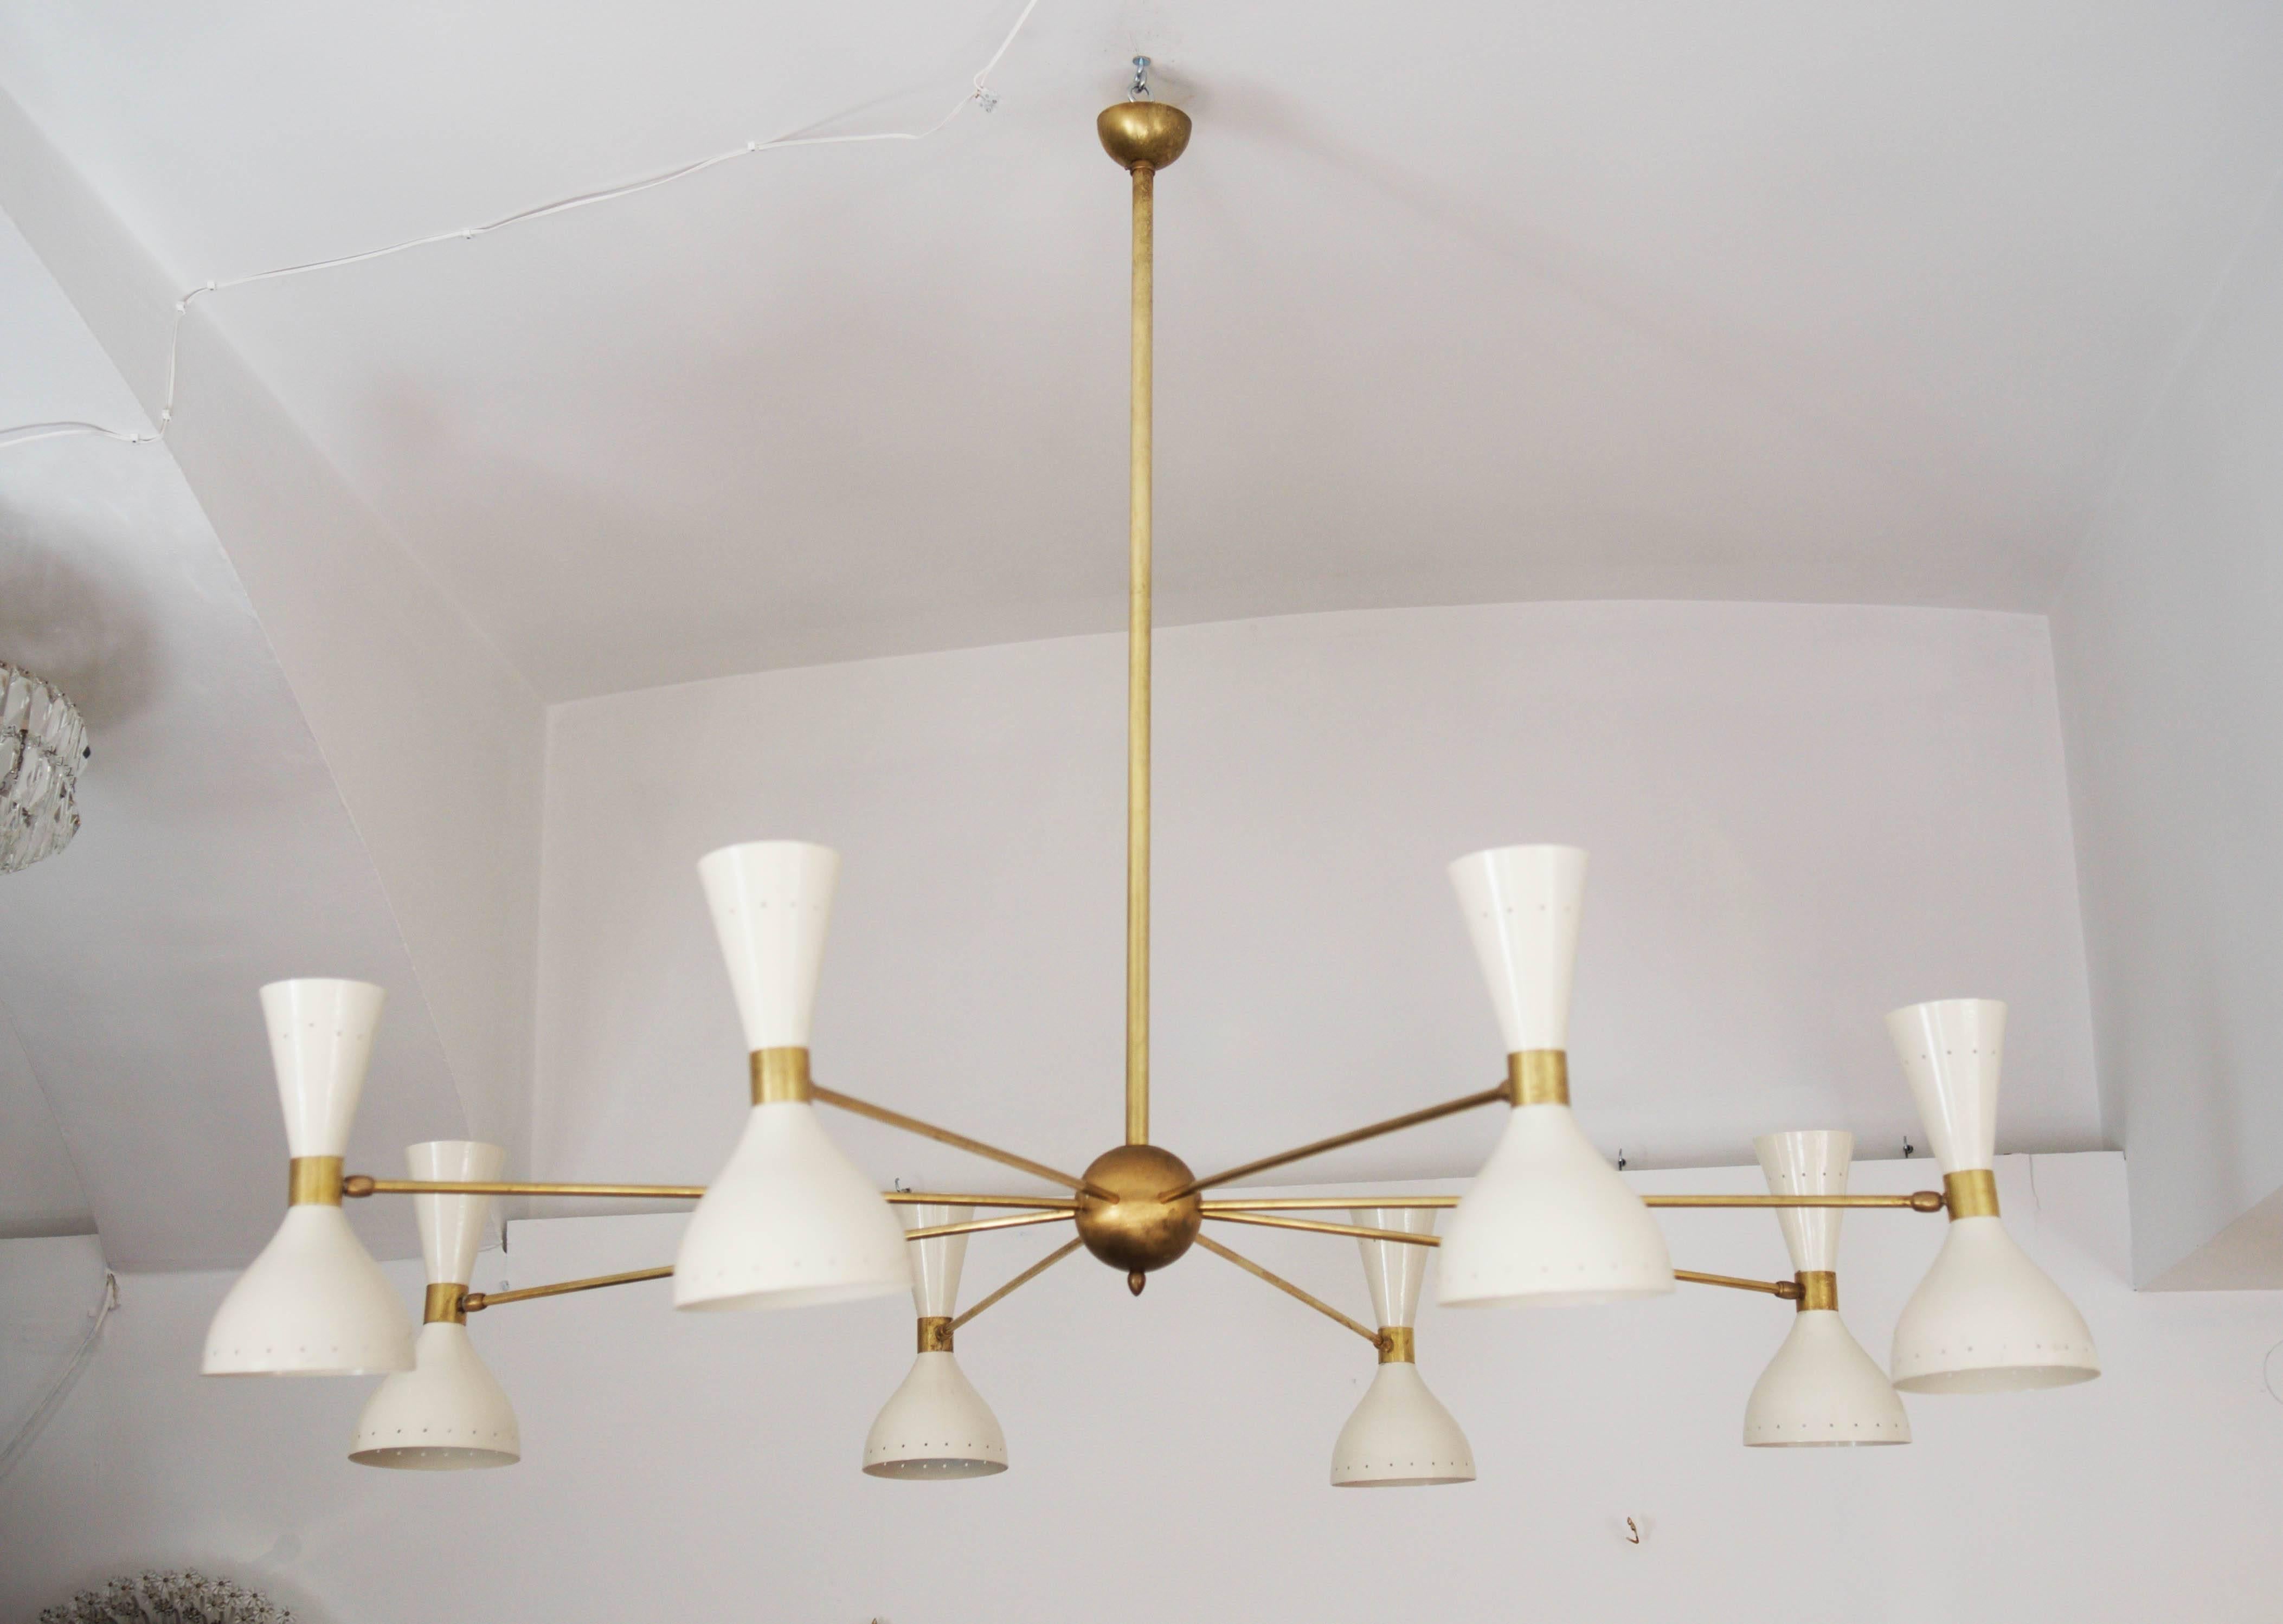 Midcentury huge spider chandelier made in Italy in the 1950s style of Stilnovo.
Brass rod and eight arms ending in adjustable white lacquered double cone shades, each with up and down shining lights, fitted with porcelain E14 sockets.
up to three